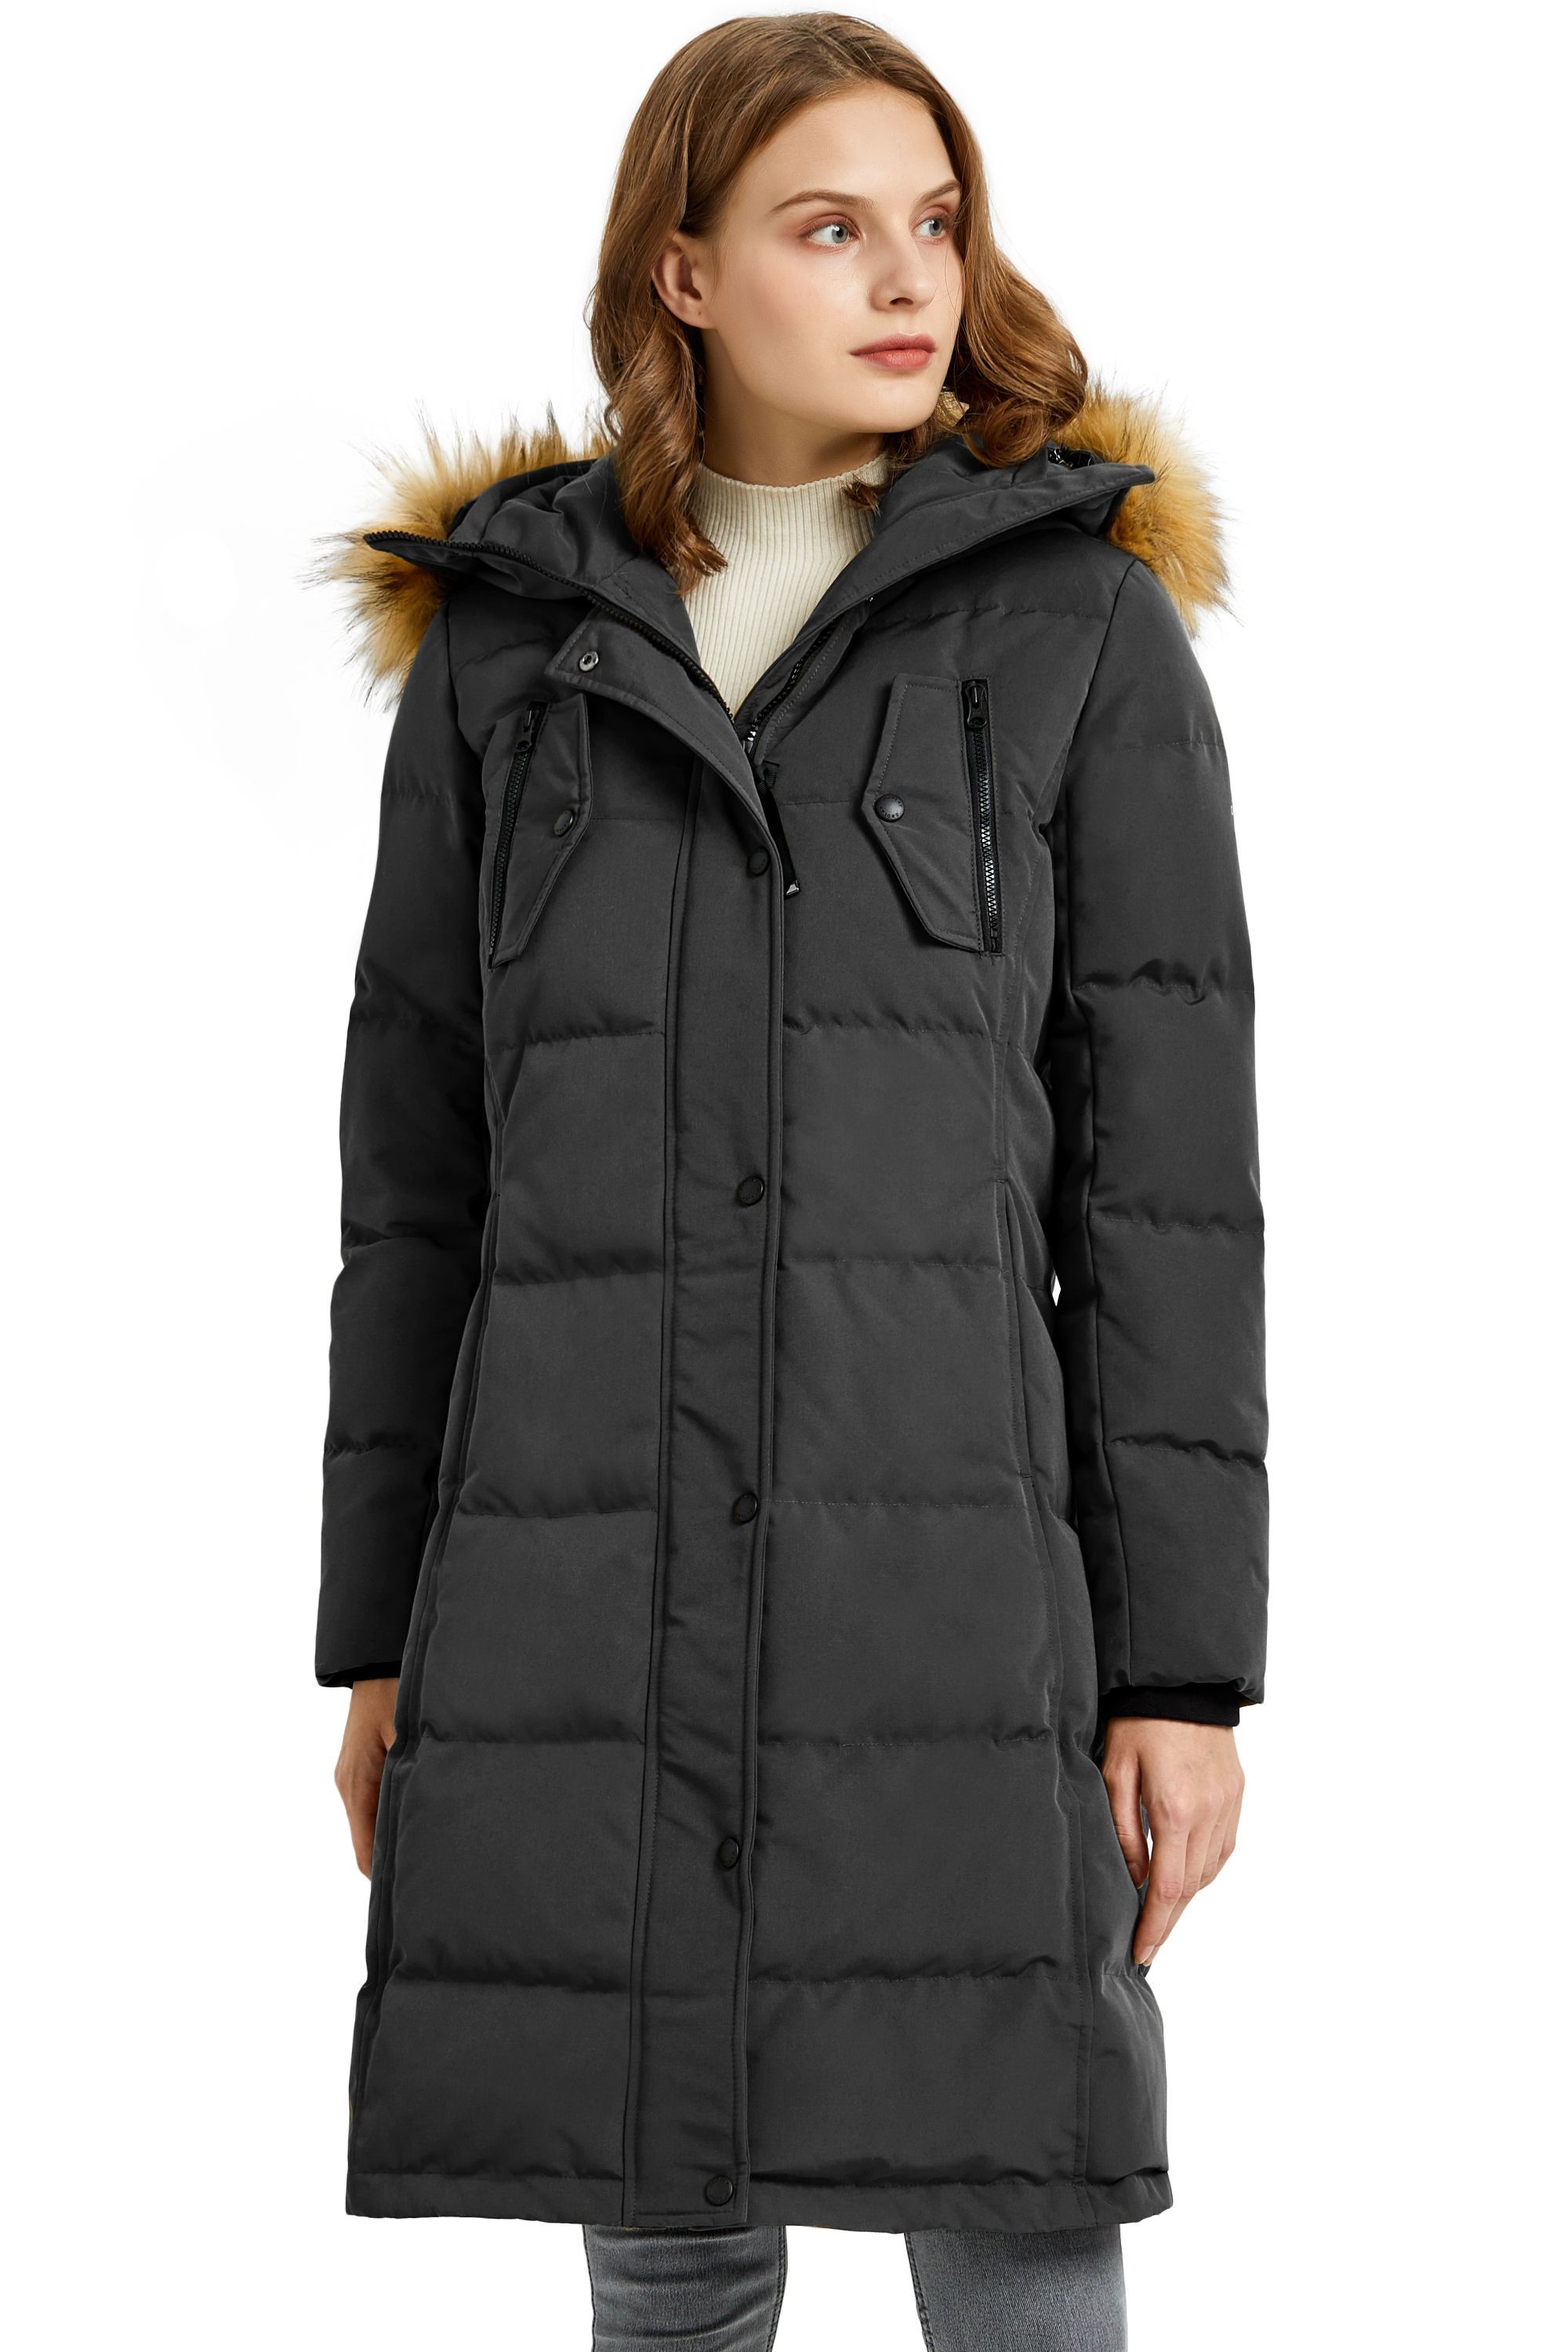 Orolay Women's Down Jacket Winter Long Coat Windproof Puffer Jacket with Fur Hood - image 1 of 5